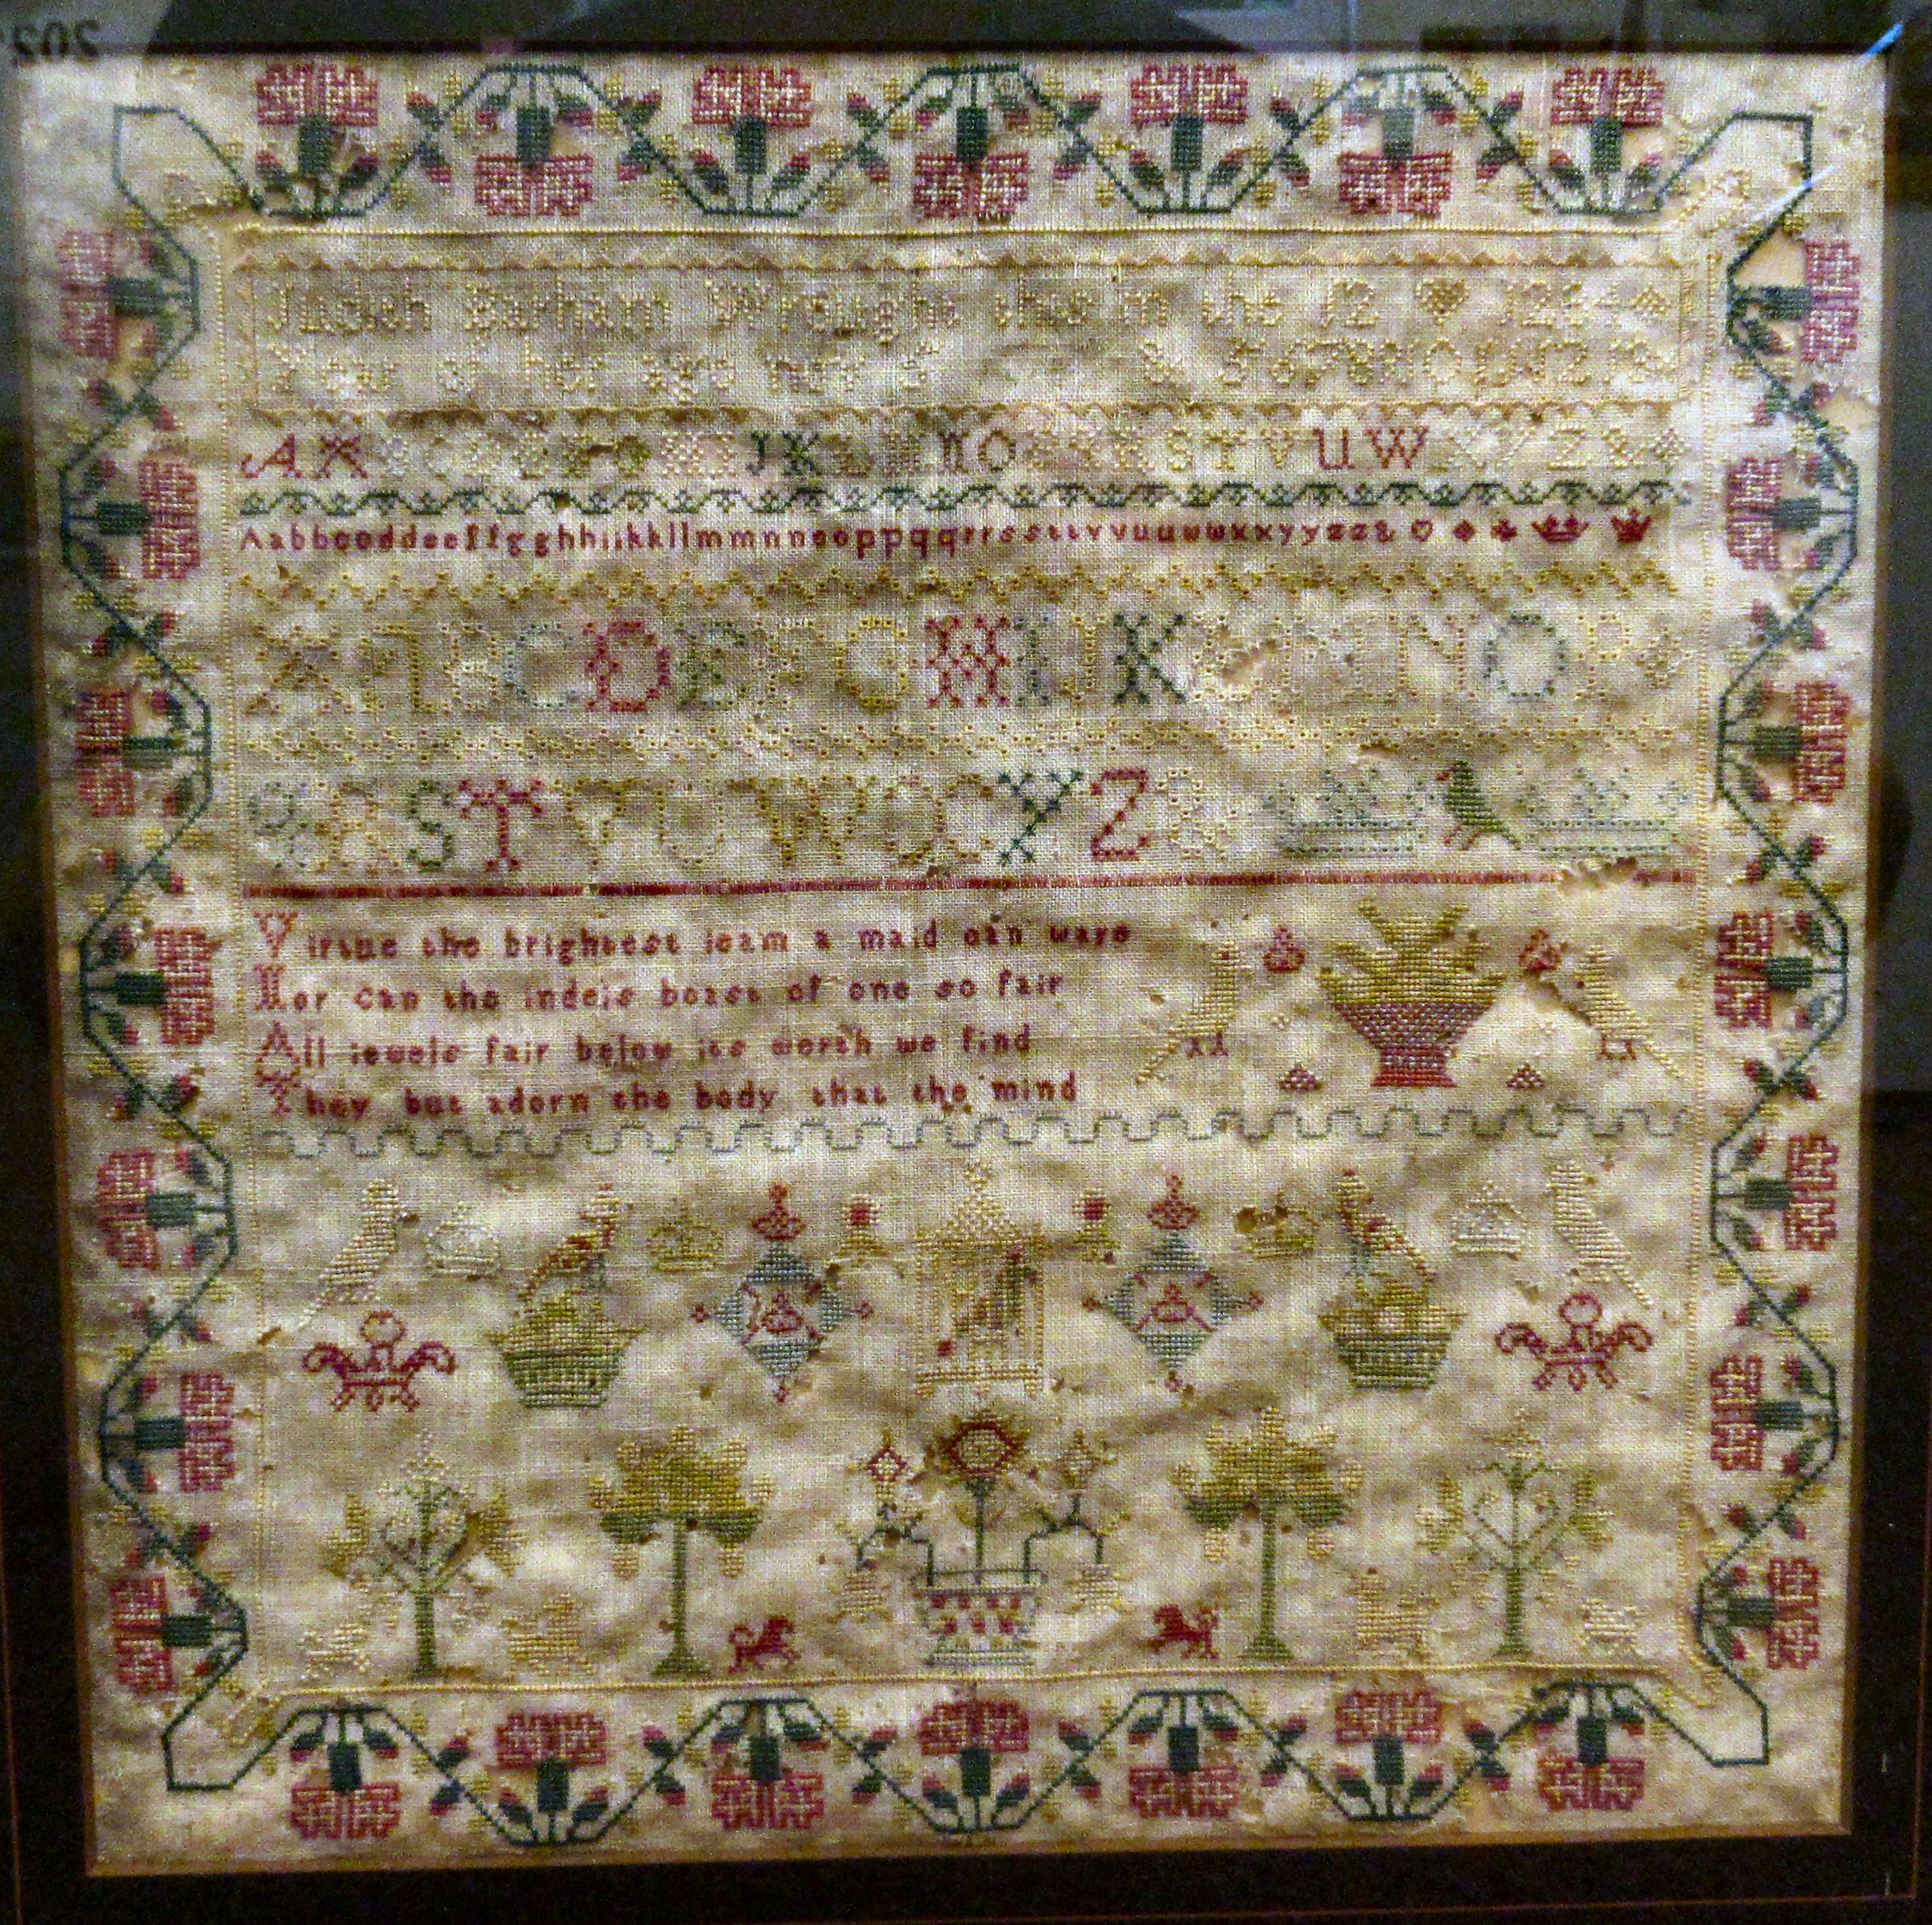 An early 19thC needlework sampler, the work of one Judith Barham, aged 12, featuring four lines of